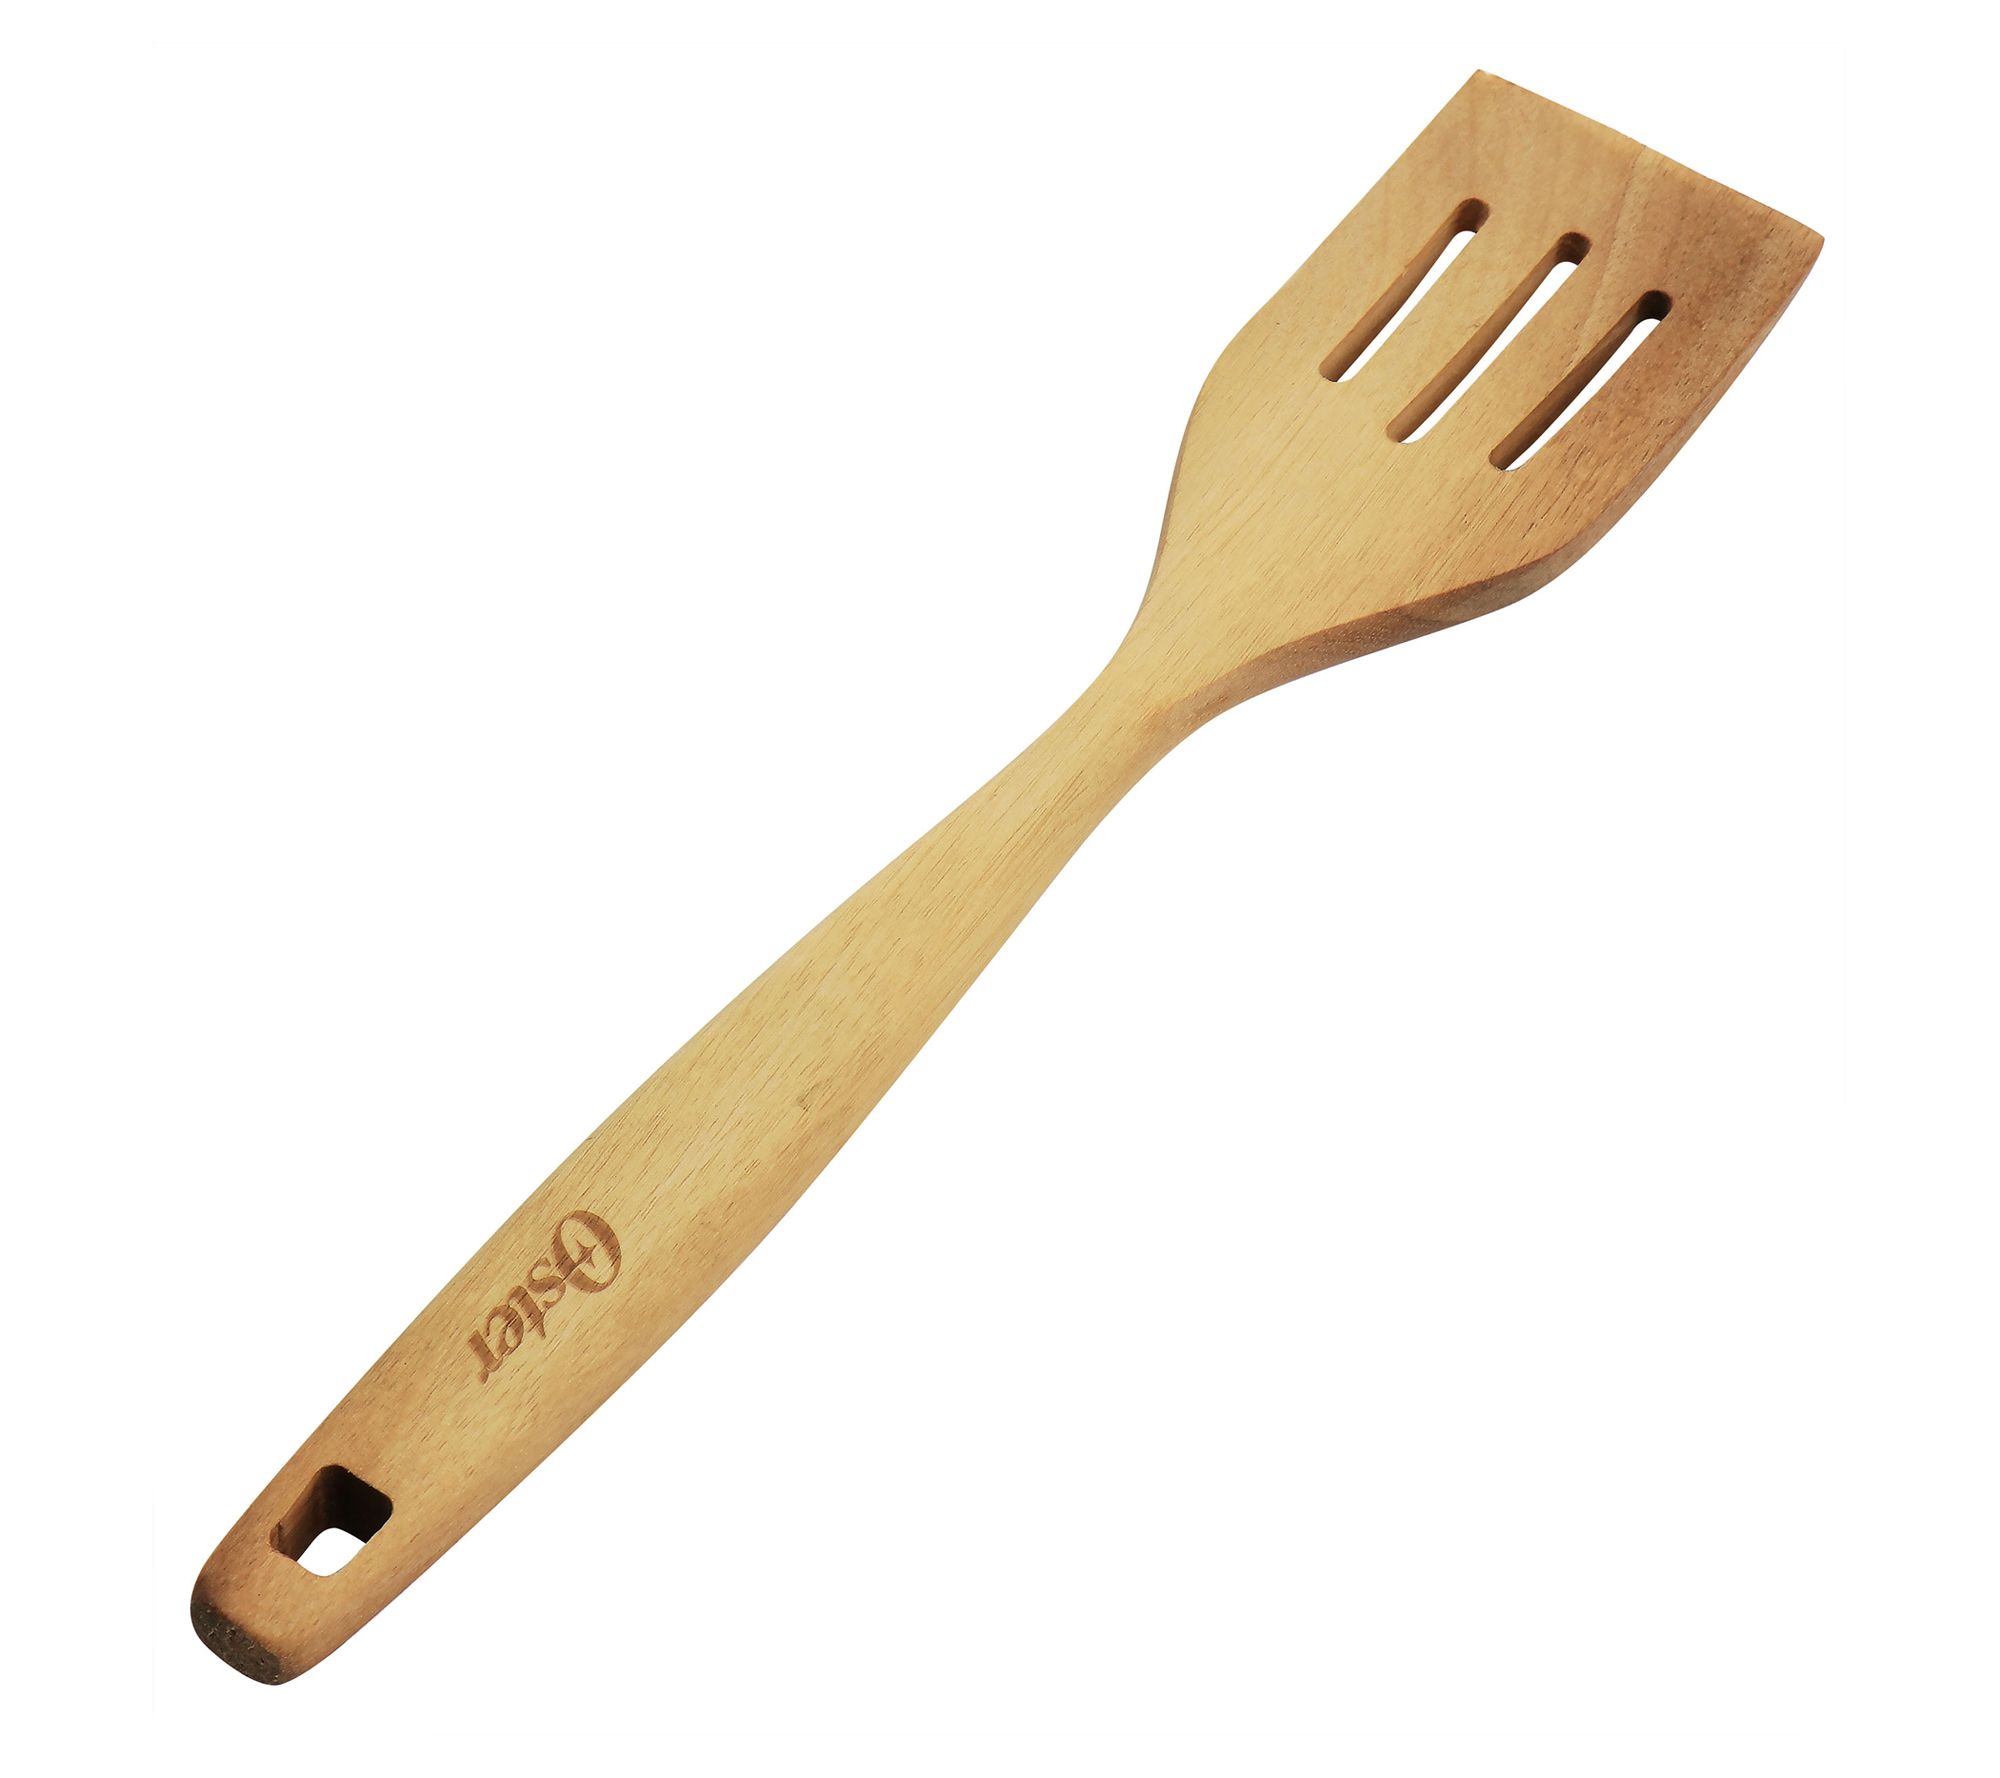 As Is Mad Hungry 4-Pc Acacia Wood Spurtles Silicone Handle 